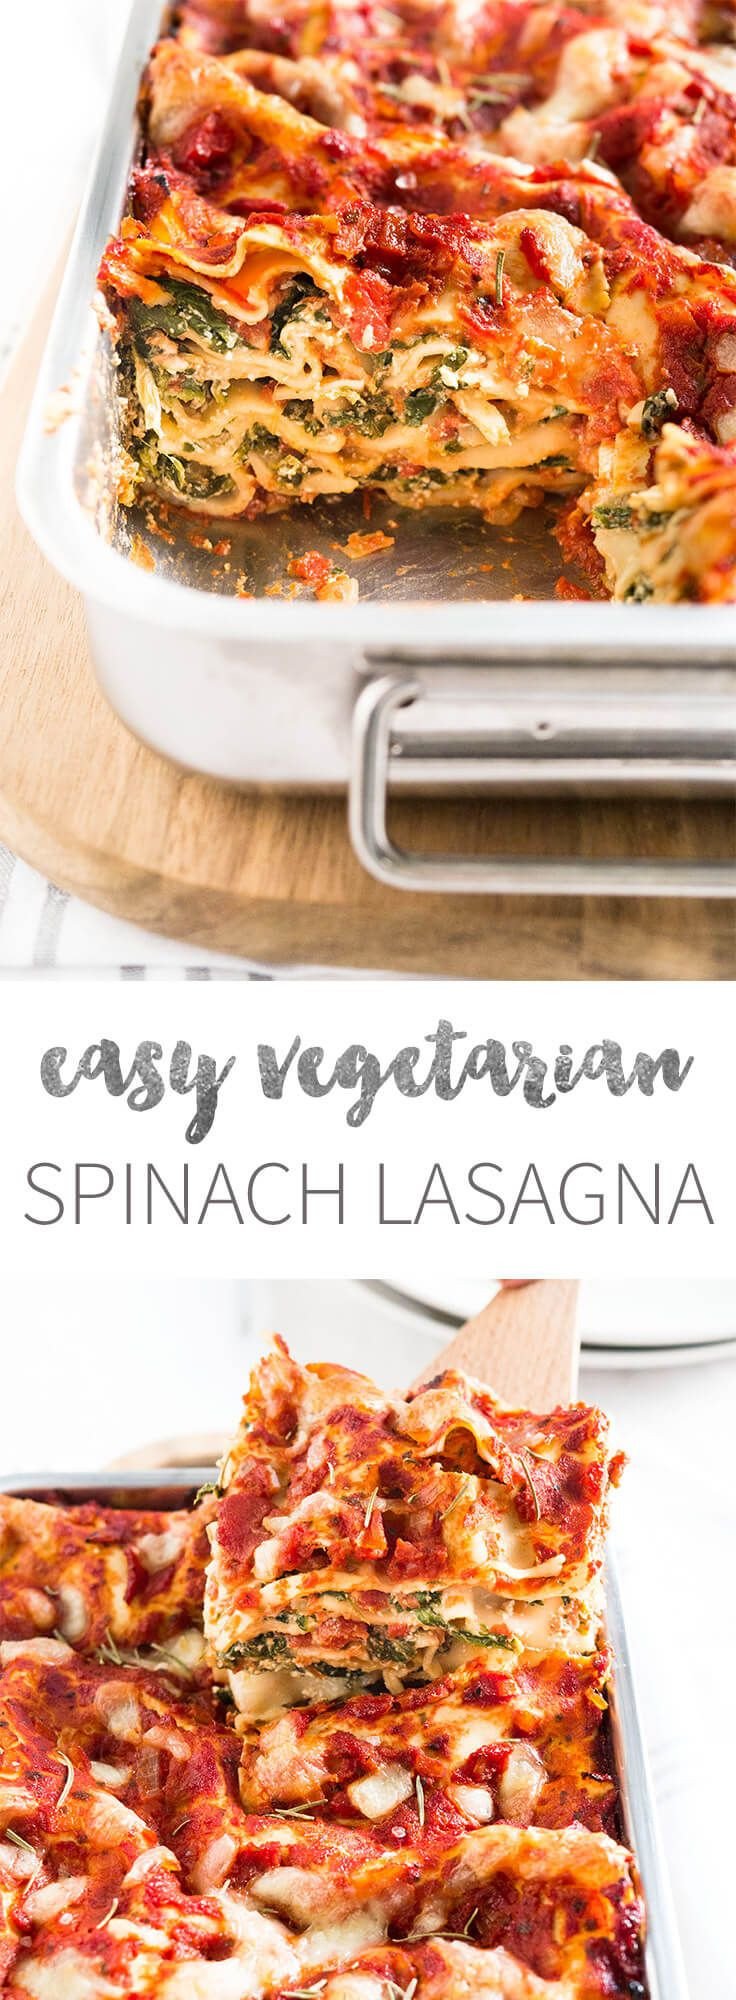 Vegetarian Lasagna Recipe Spinach
 This Easy Ve arian Spinach Lasagna is made with layers